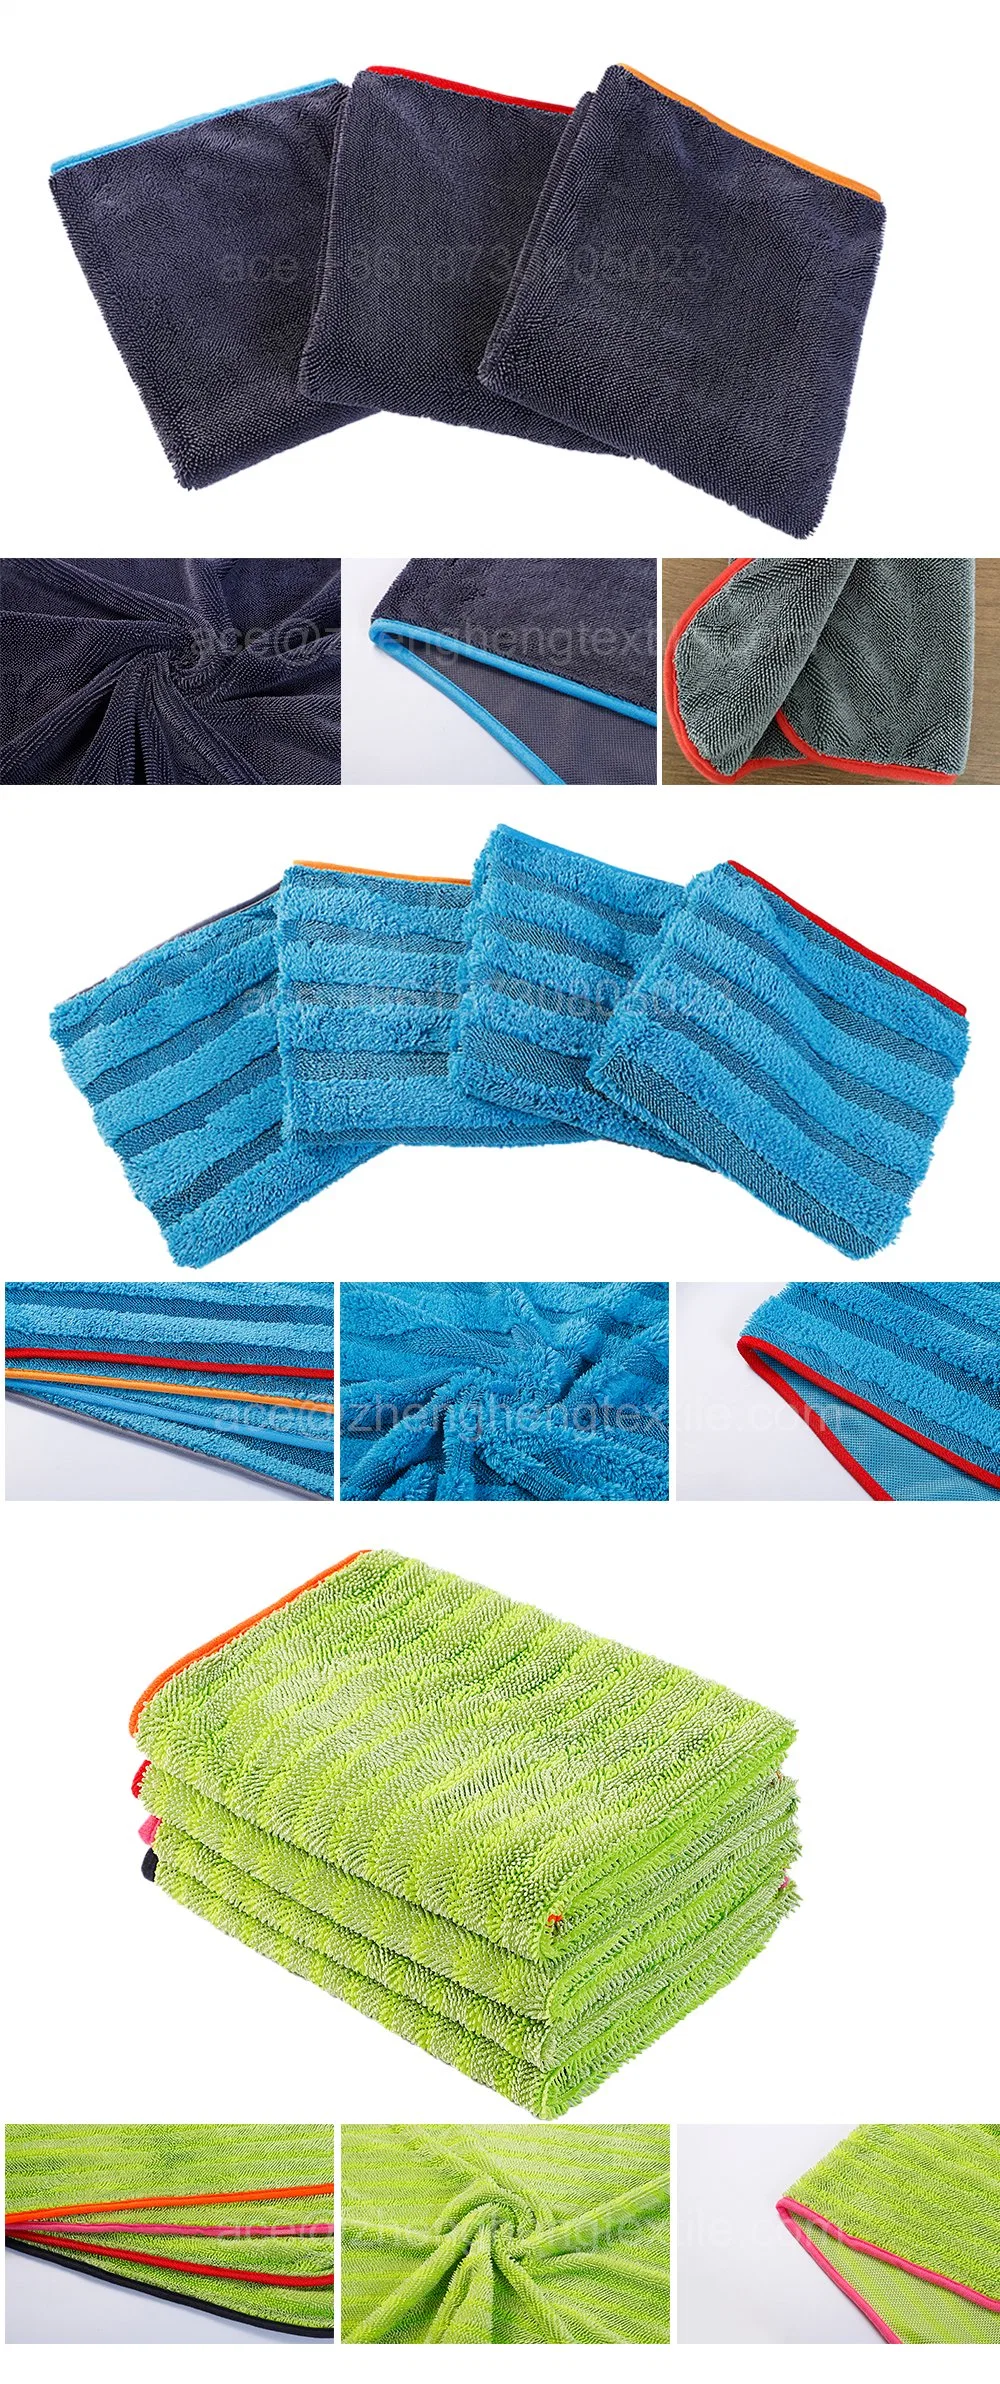 Folded Header Card Packed 1200GSM 38 X 45 Cm Double Layers Cloth for Auto Absorbent Microfiber Twist Loop Drying Car Wash Cleaning Towel